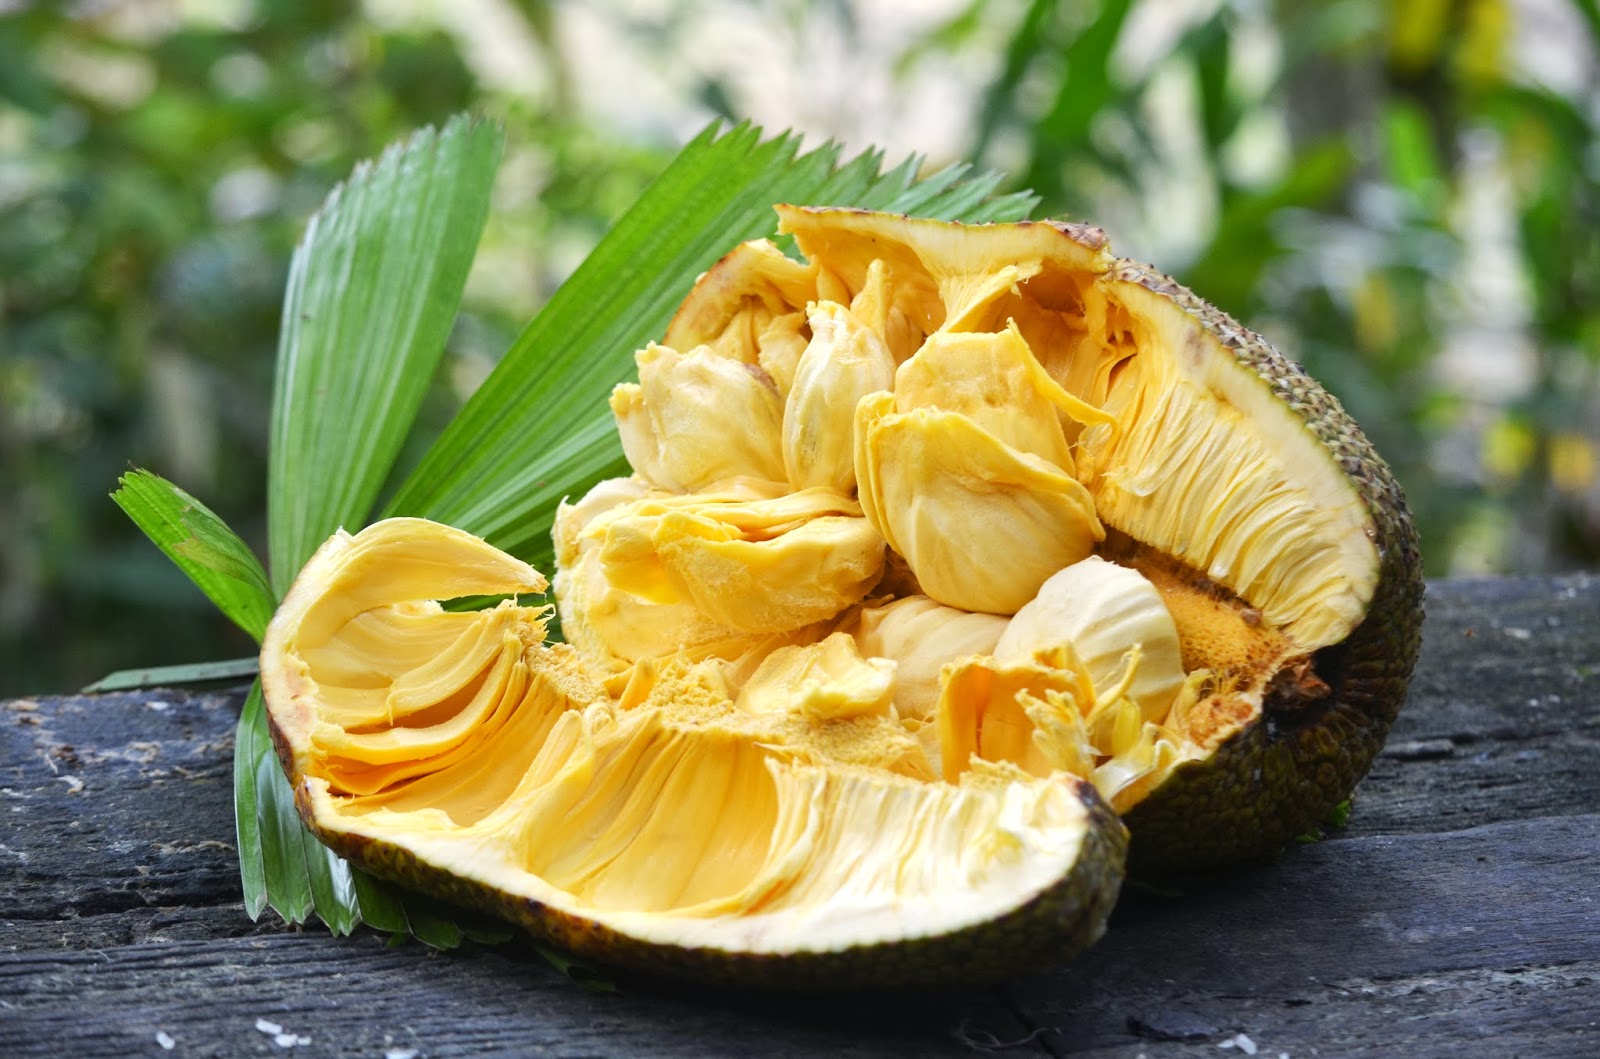 🍍 You Haven’t Really Lived Unless You’ve Tried at Least 12 of These Tropical Fruits Cempedak